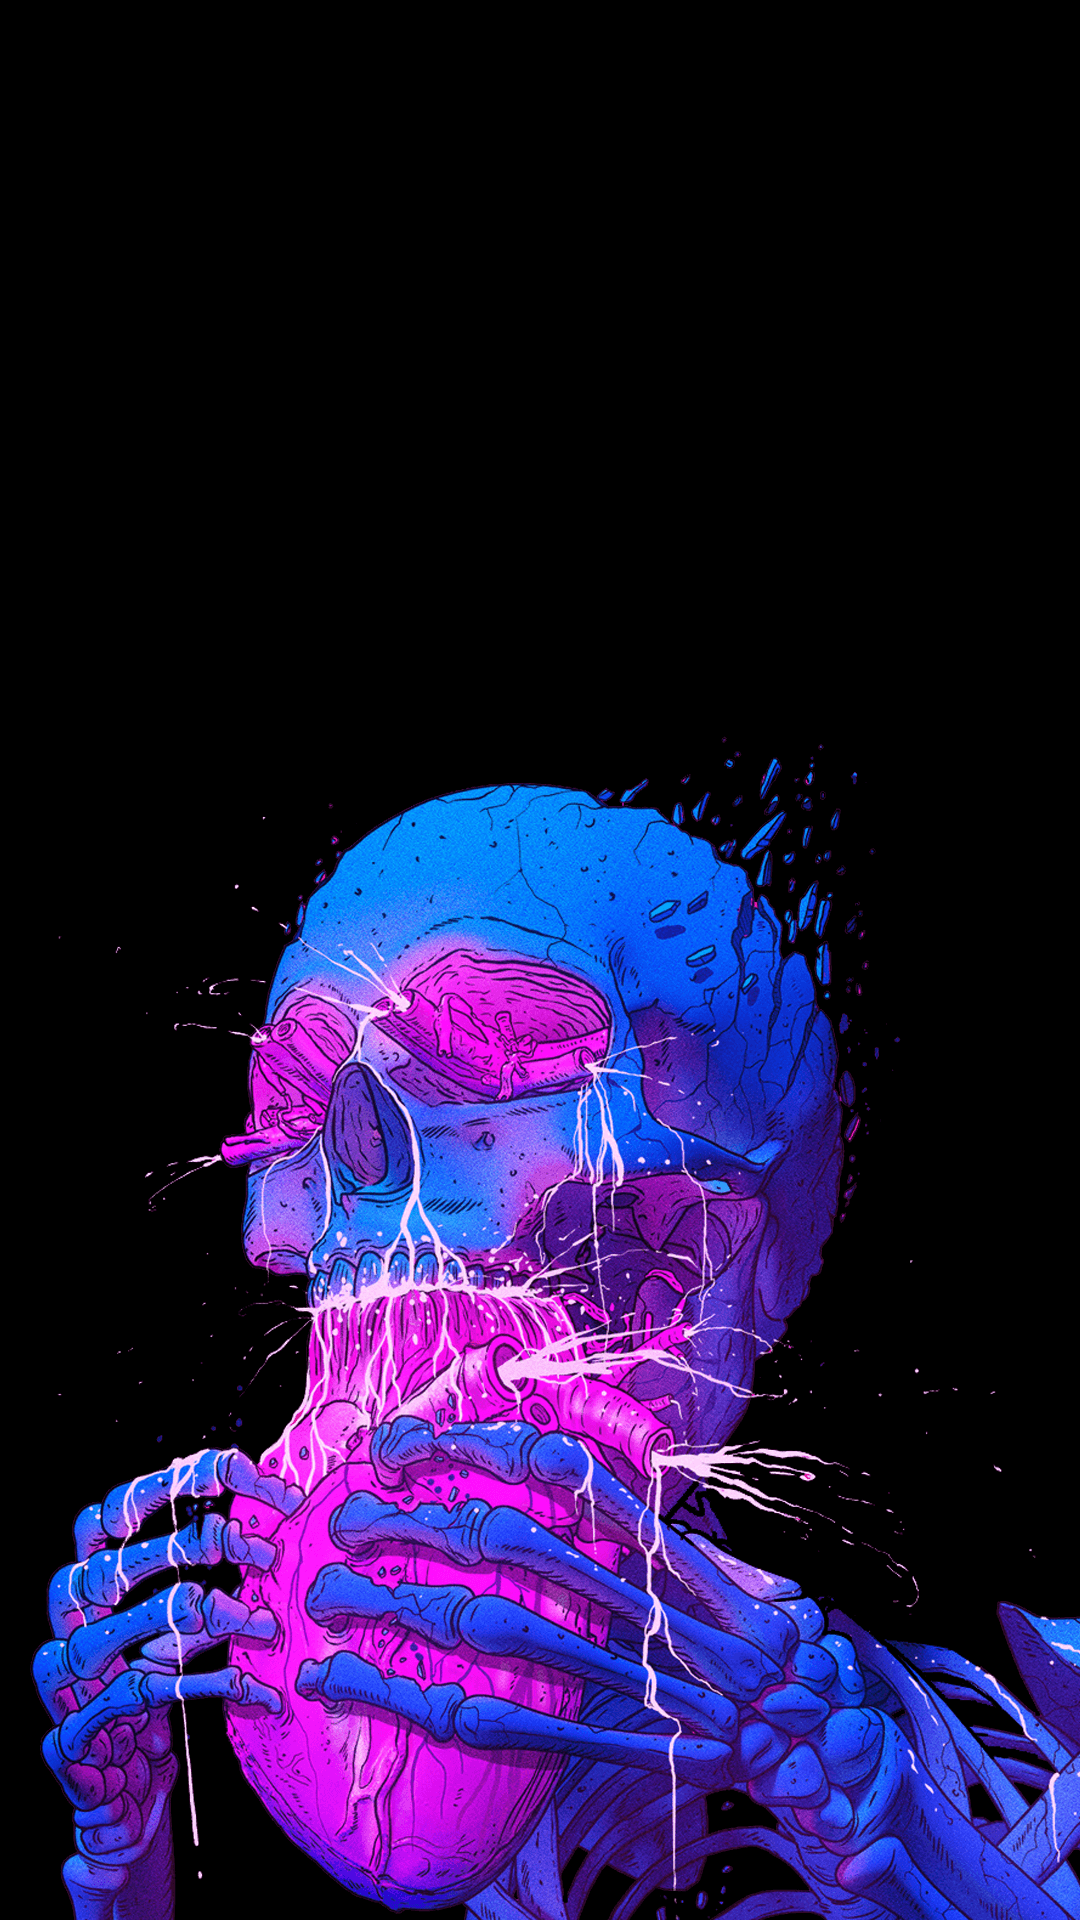 Amoled For Phone Wallpapers - Wallpaper Cave